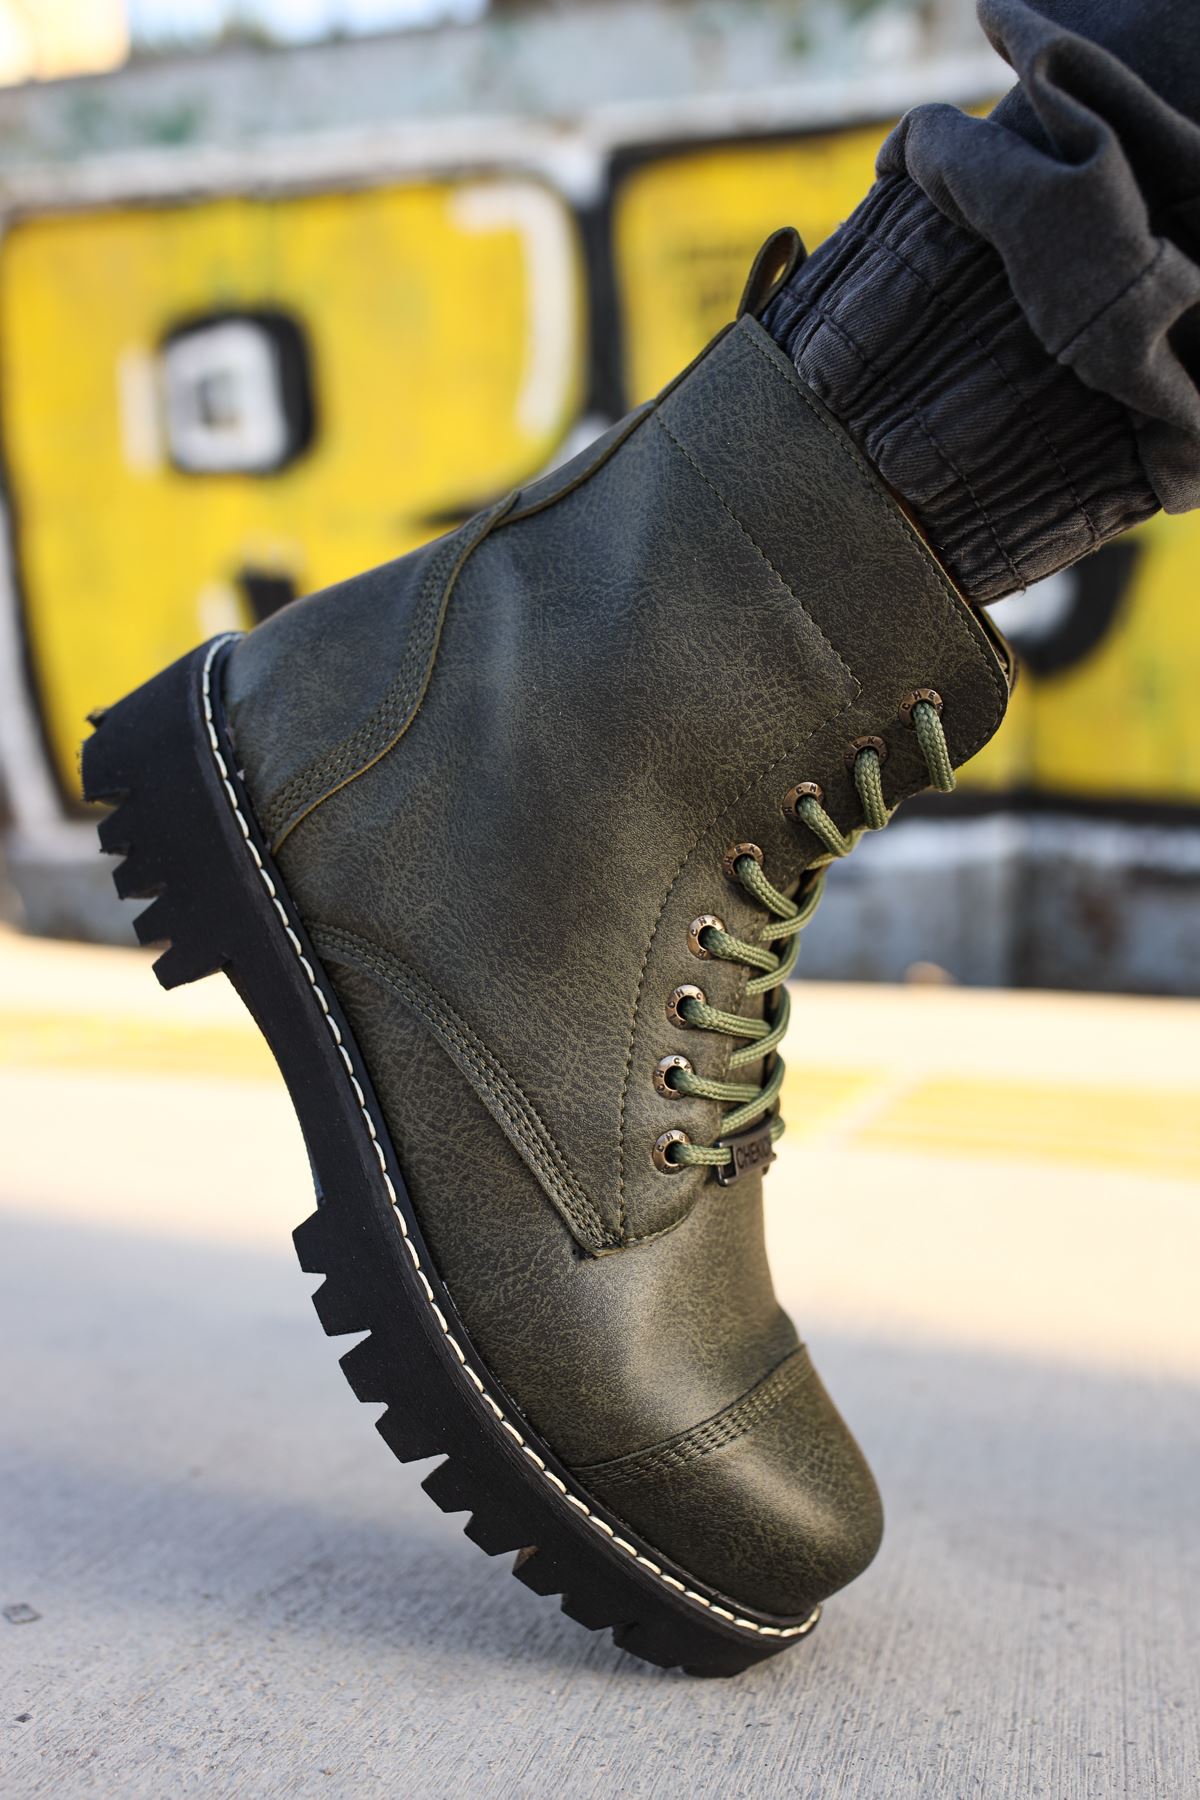 Black Boots for Men Non-Leather Zipper and Lace-up Winter Season Snow Ankle Warm Comfortable High Quality Footwear Gentlemen Basic Trend Solid Fashion Male Classic Outdoor 2021 New-Arrival CH009